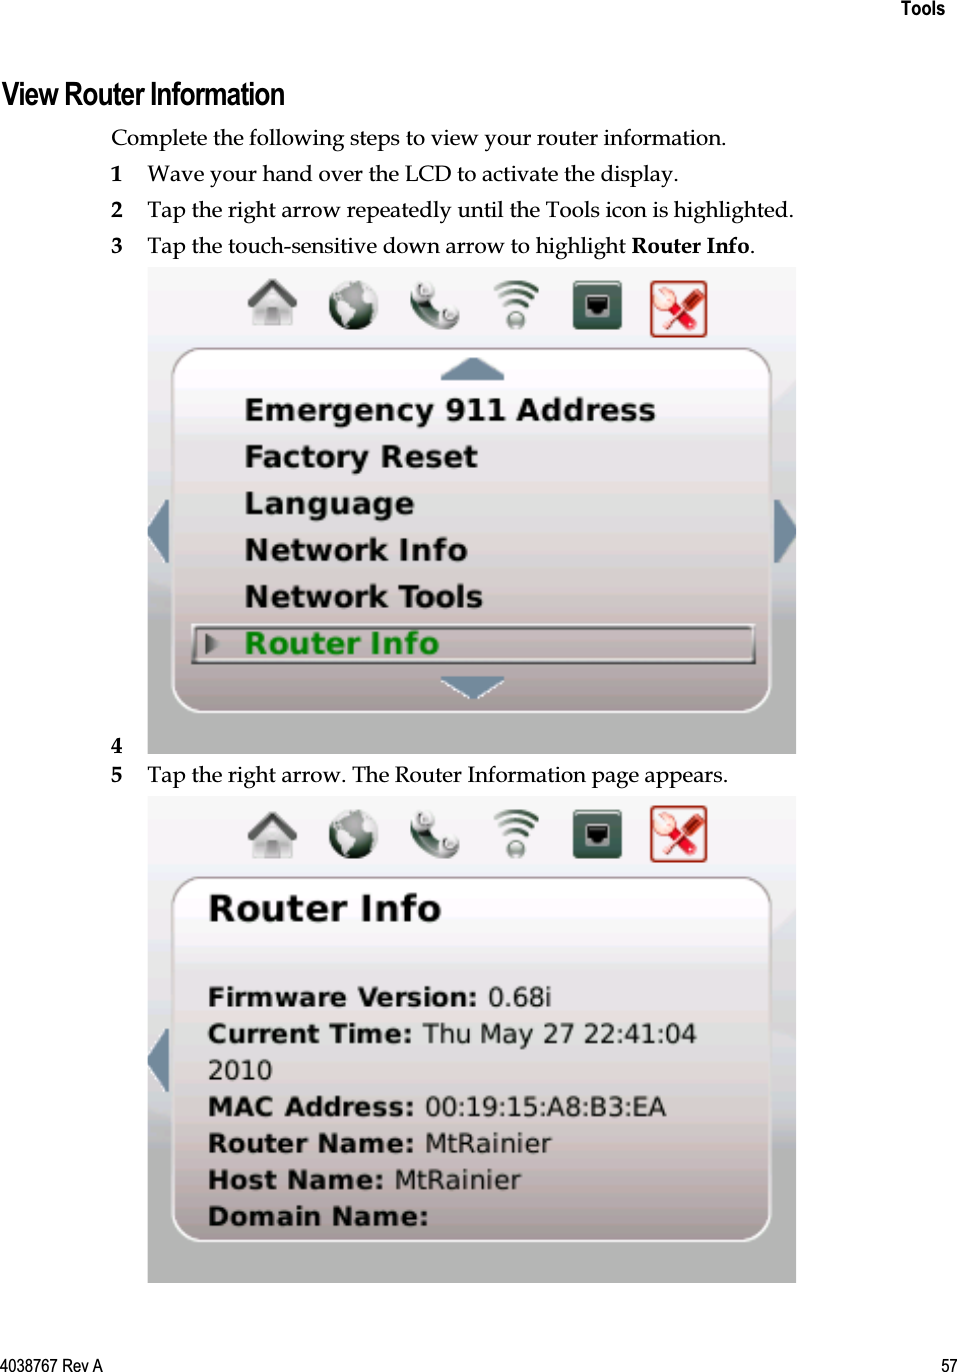    Tools  4038767 Rev A  57  View Router Information Complete the following steps to view your router information. 1 Wave your hand over the LCD to activate the display. 2 Tap the right arrow repeatedly until the Tools icon is highlighted. 3 Tap the touch-sensitive down arrow to highlight Router Info. 4  5 Tap the right arrow. The Router Information page appears.  